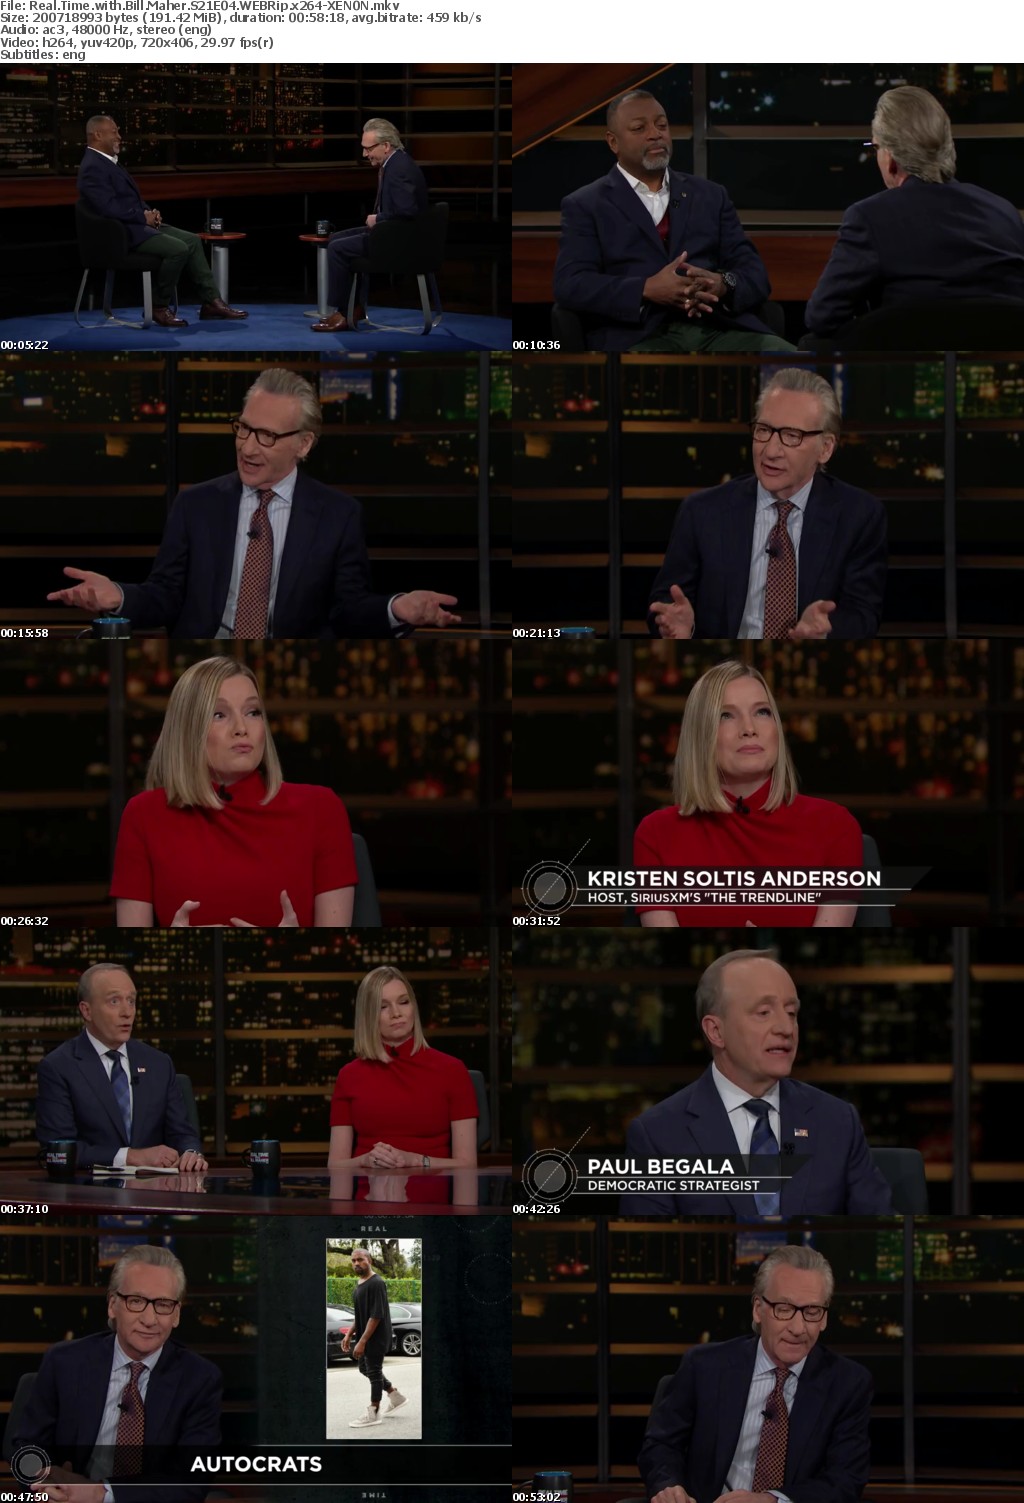 Real Time with Bill Maher S21E04 WEBRip x264-XEN0N